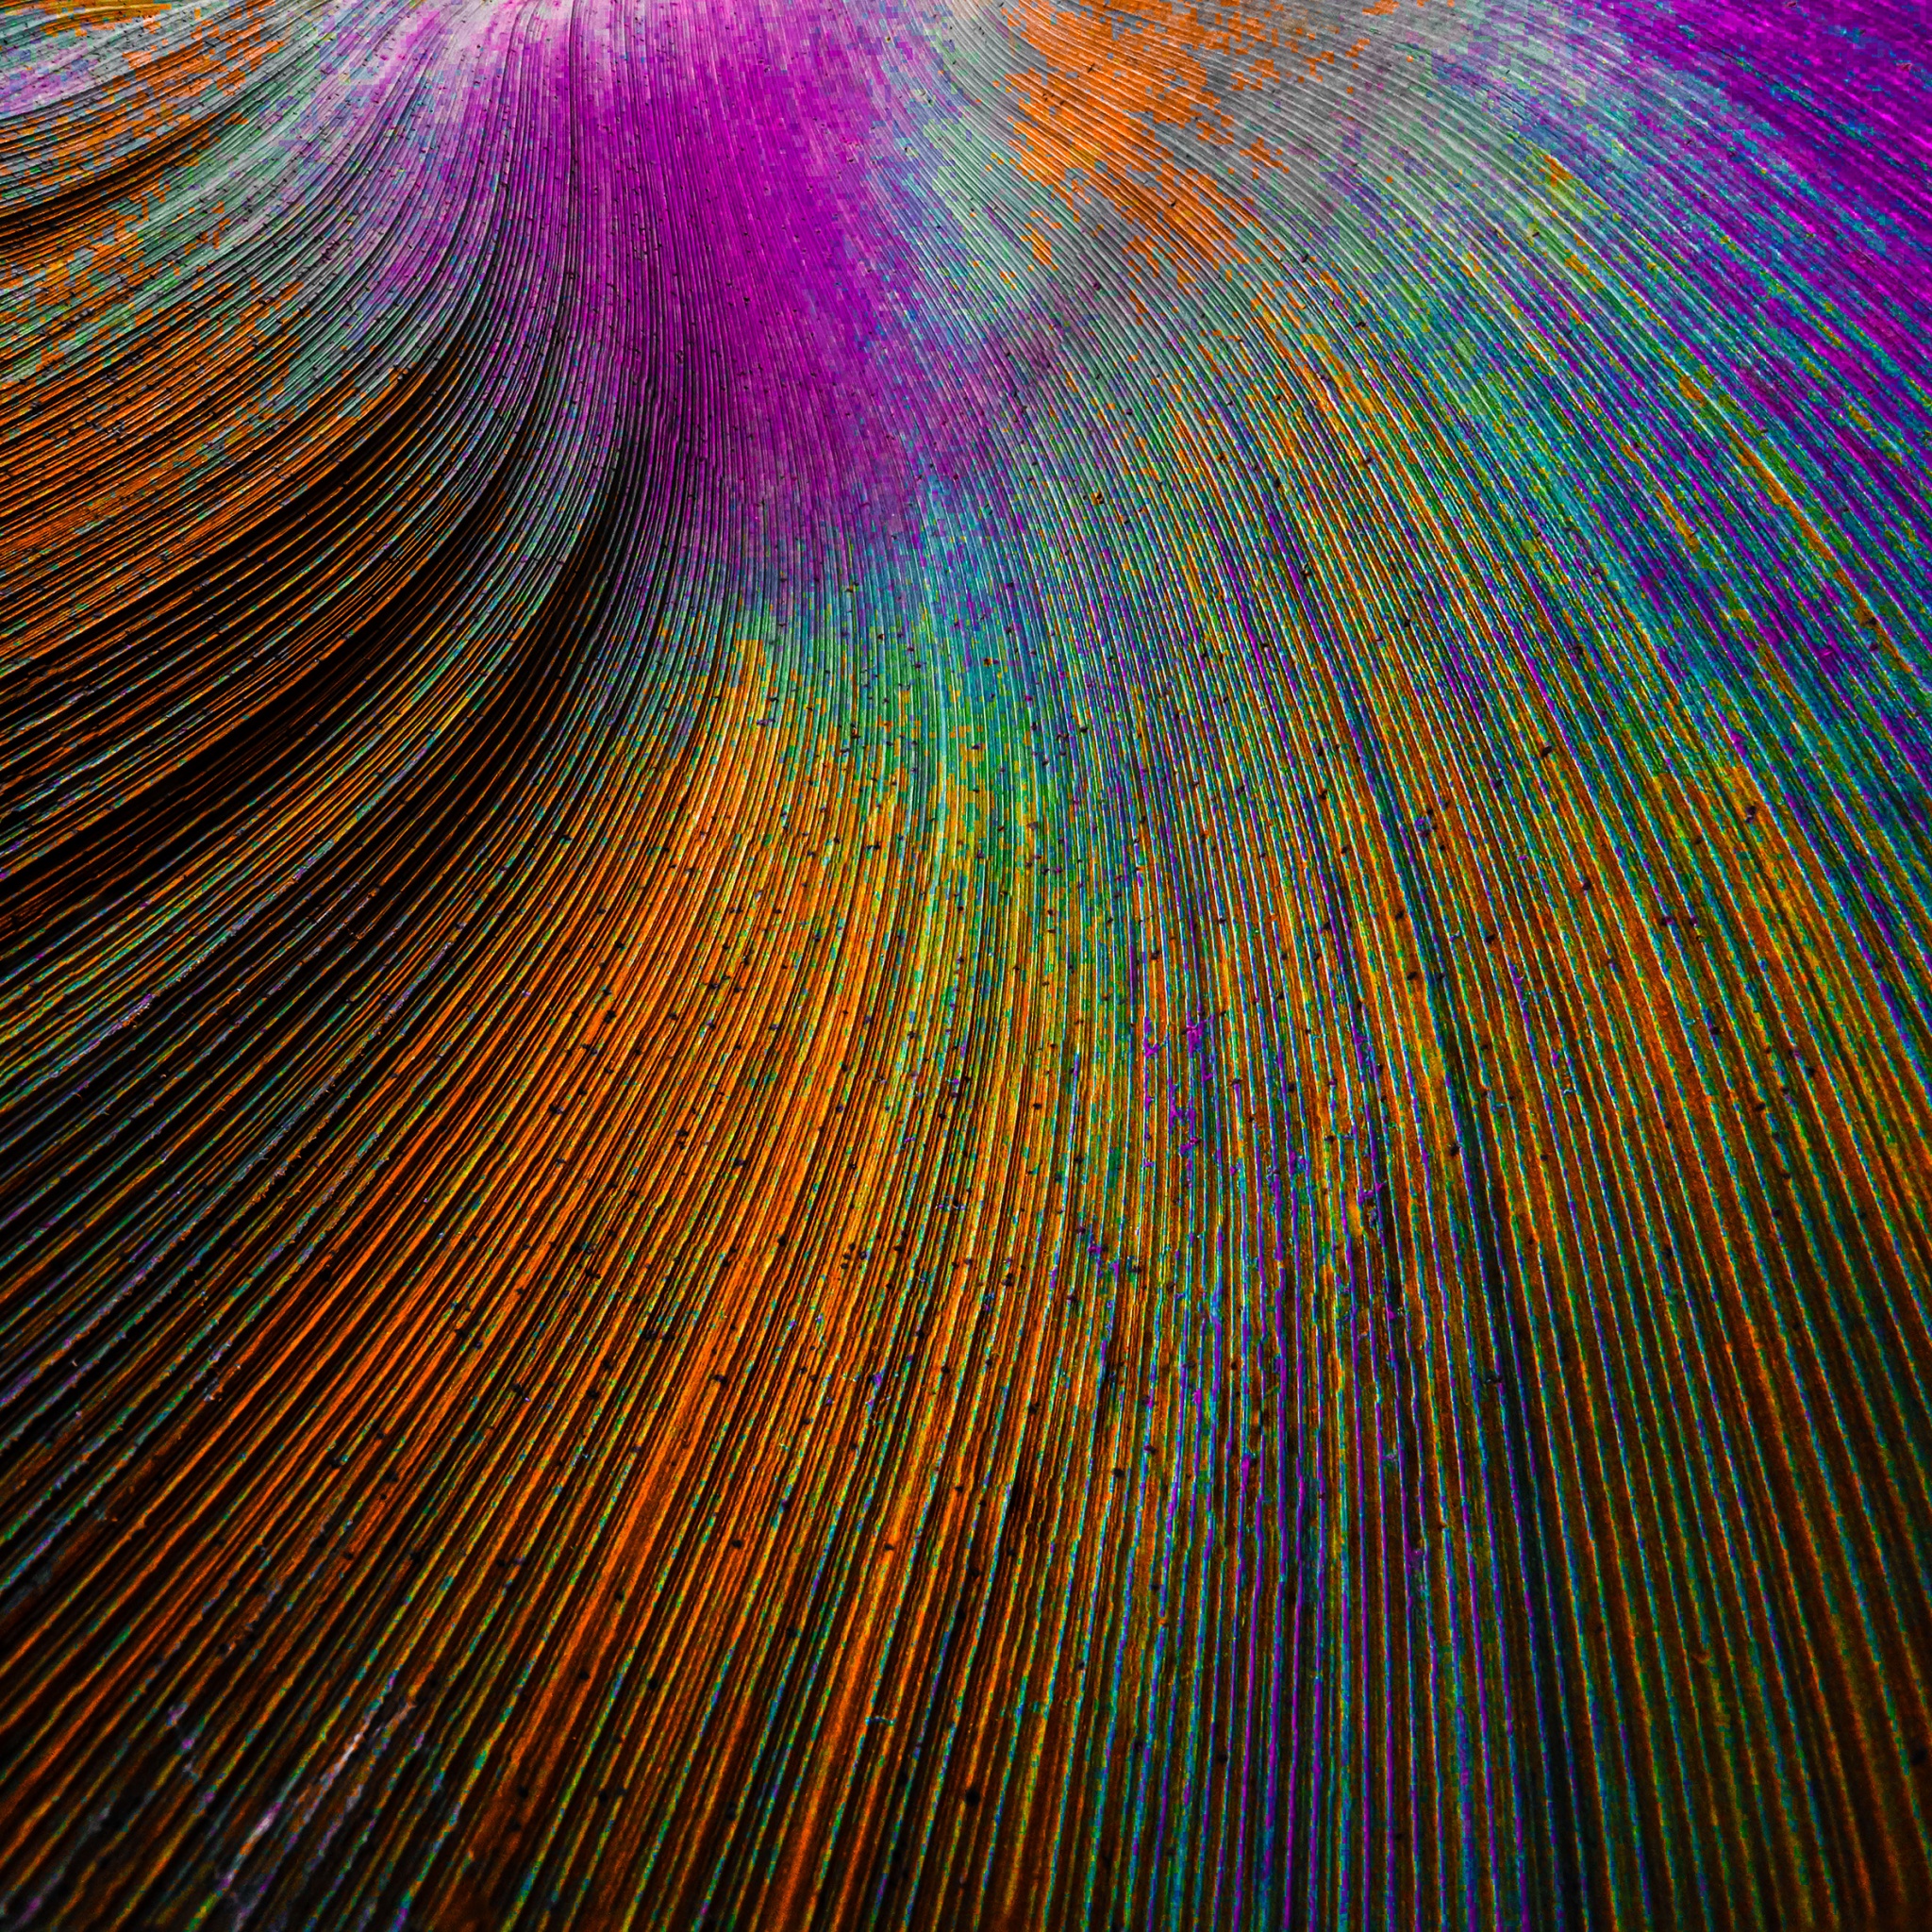 Peacock feather Wallpaper 4K, Curved lines, Colorful, Abstract, #1900